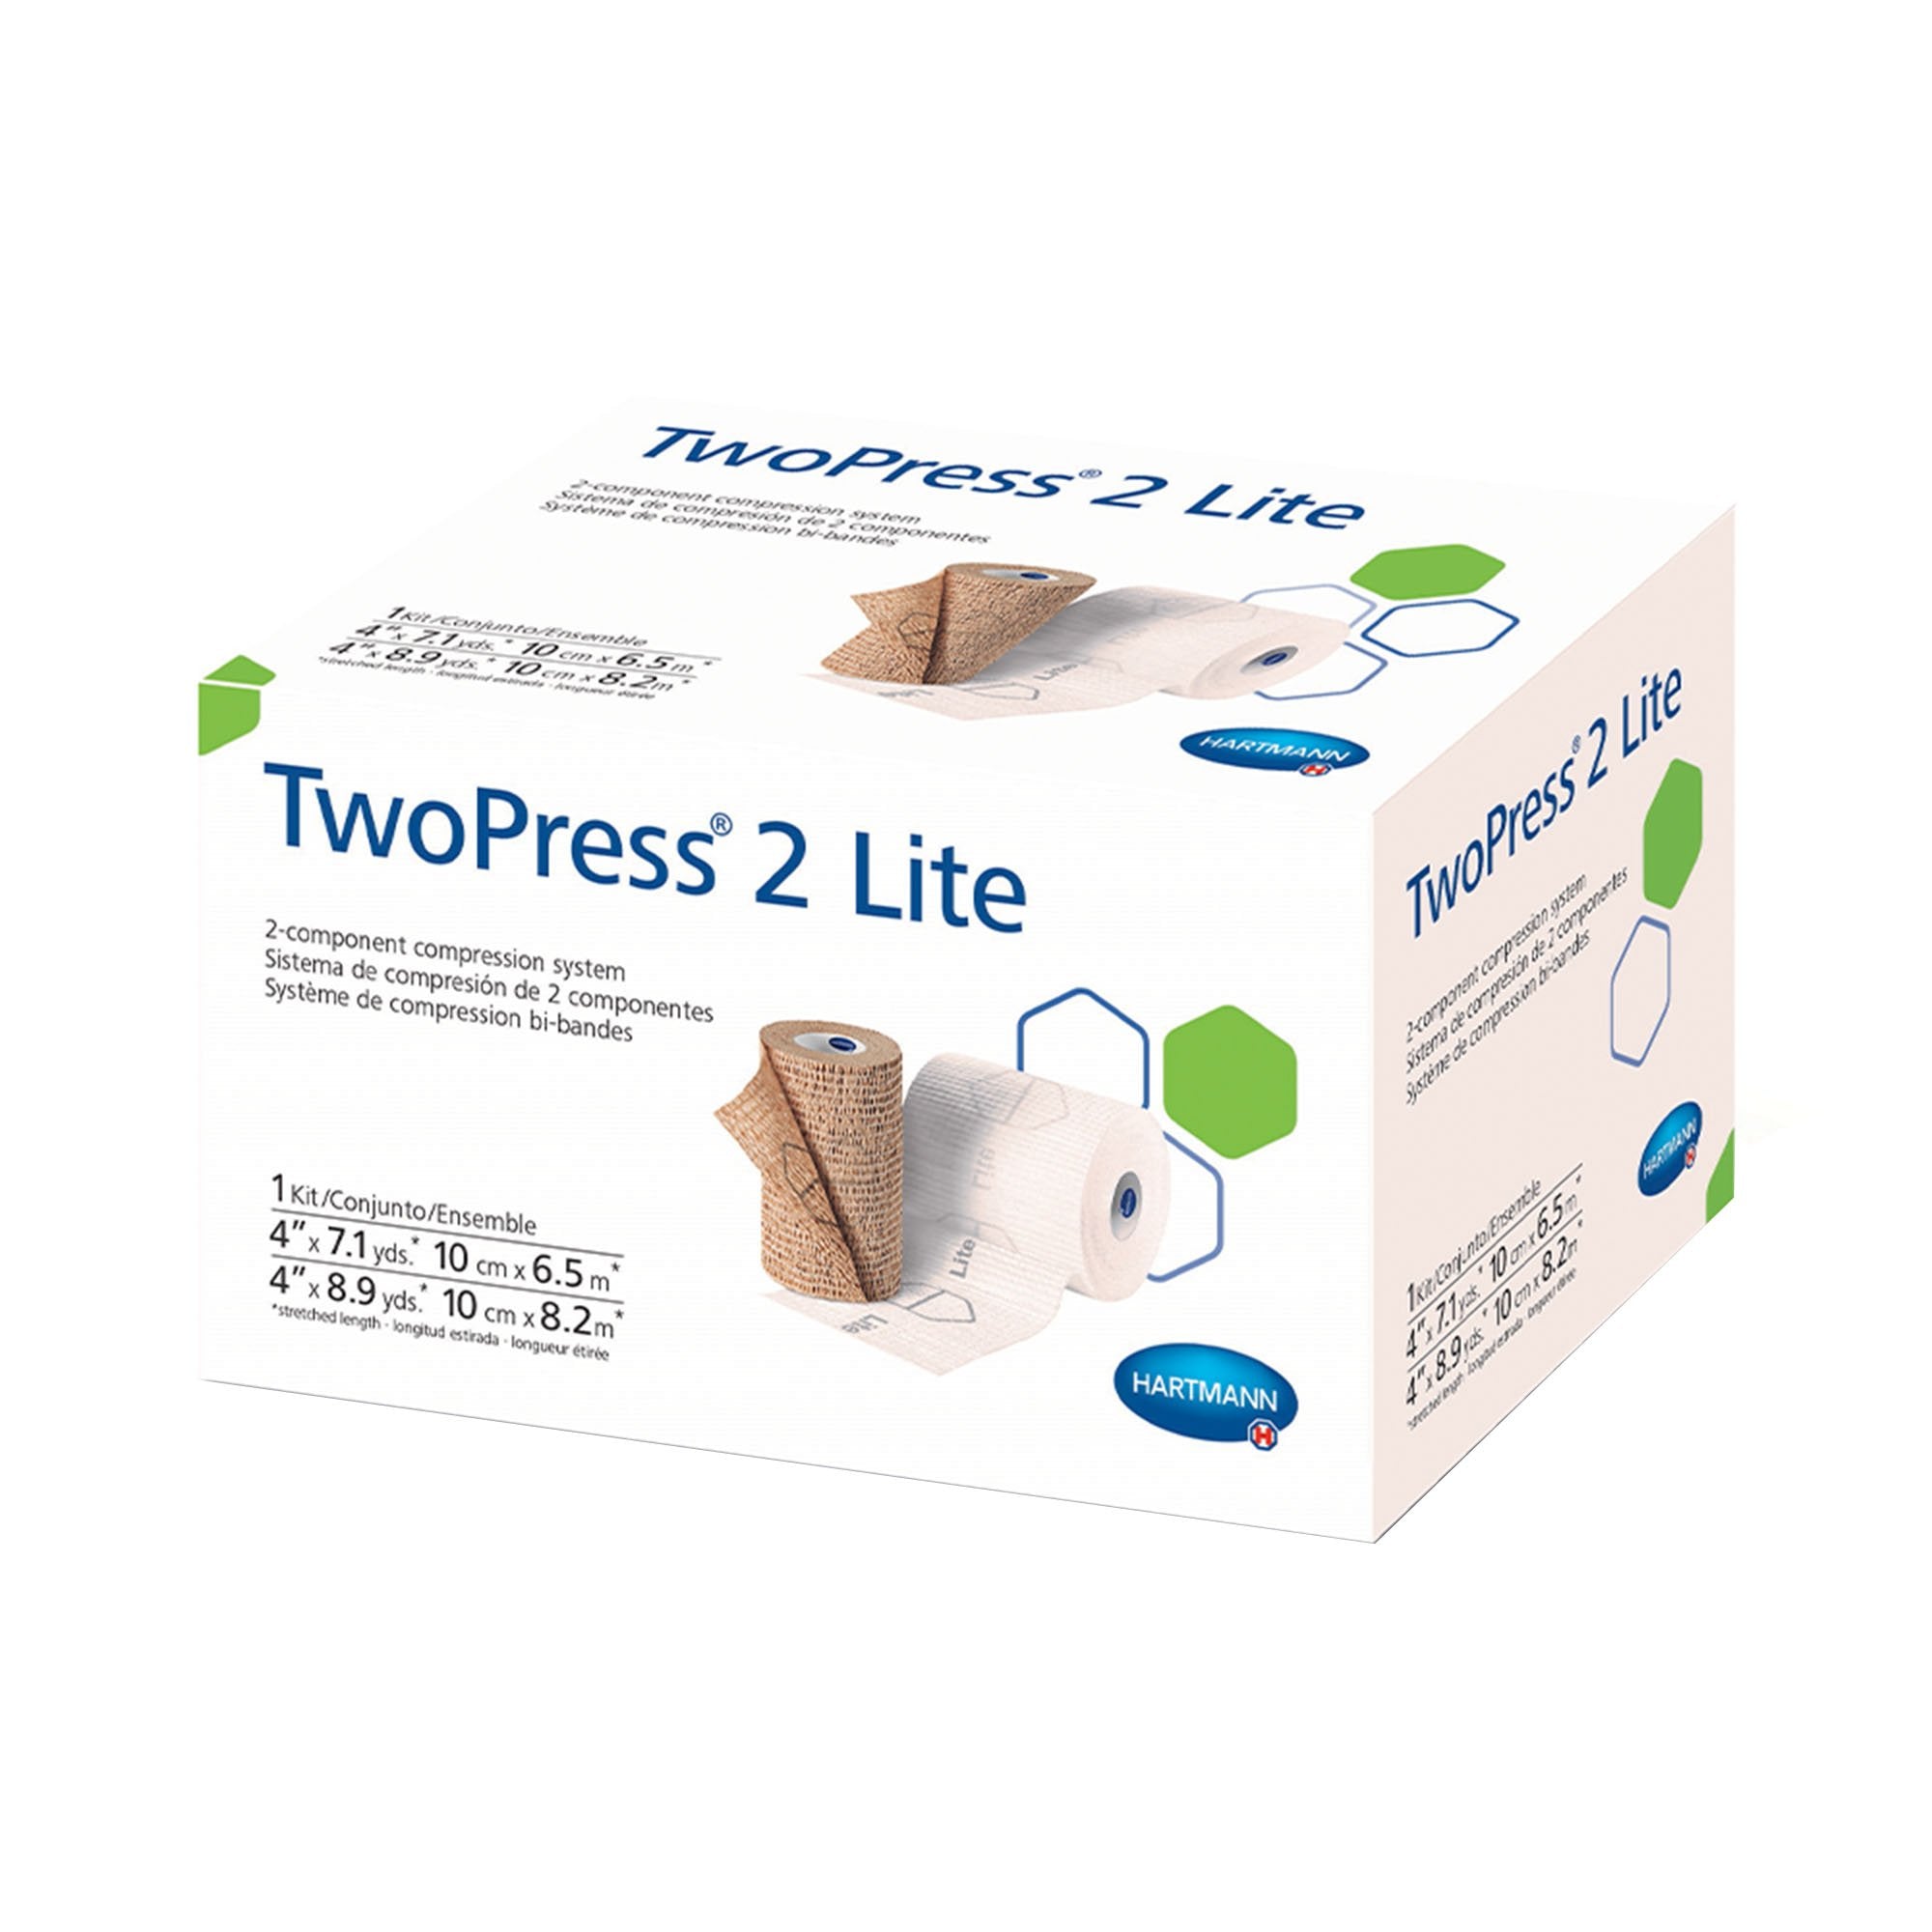 2 Layer Compression Bandage System with Visible Indicators TwoPress® 2 Lite 4 Inch X 7.1 Yard / 4 Inch X 8.9 Yard Self-Adherent Closure Tan / White NonSterile Standard Compression